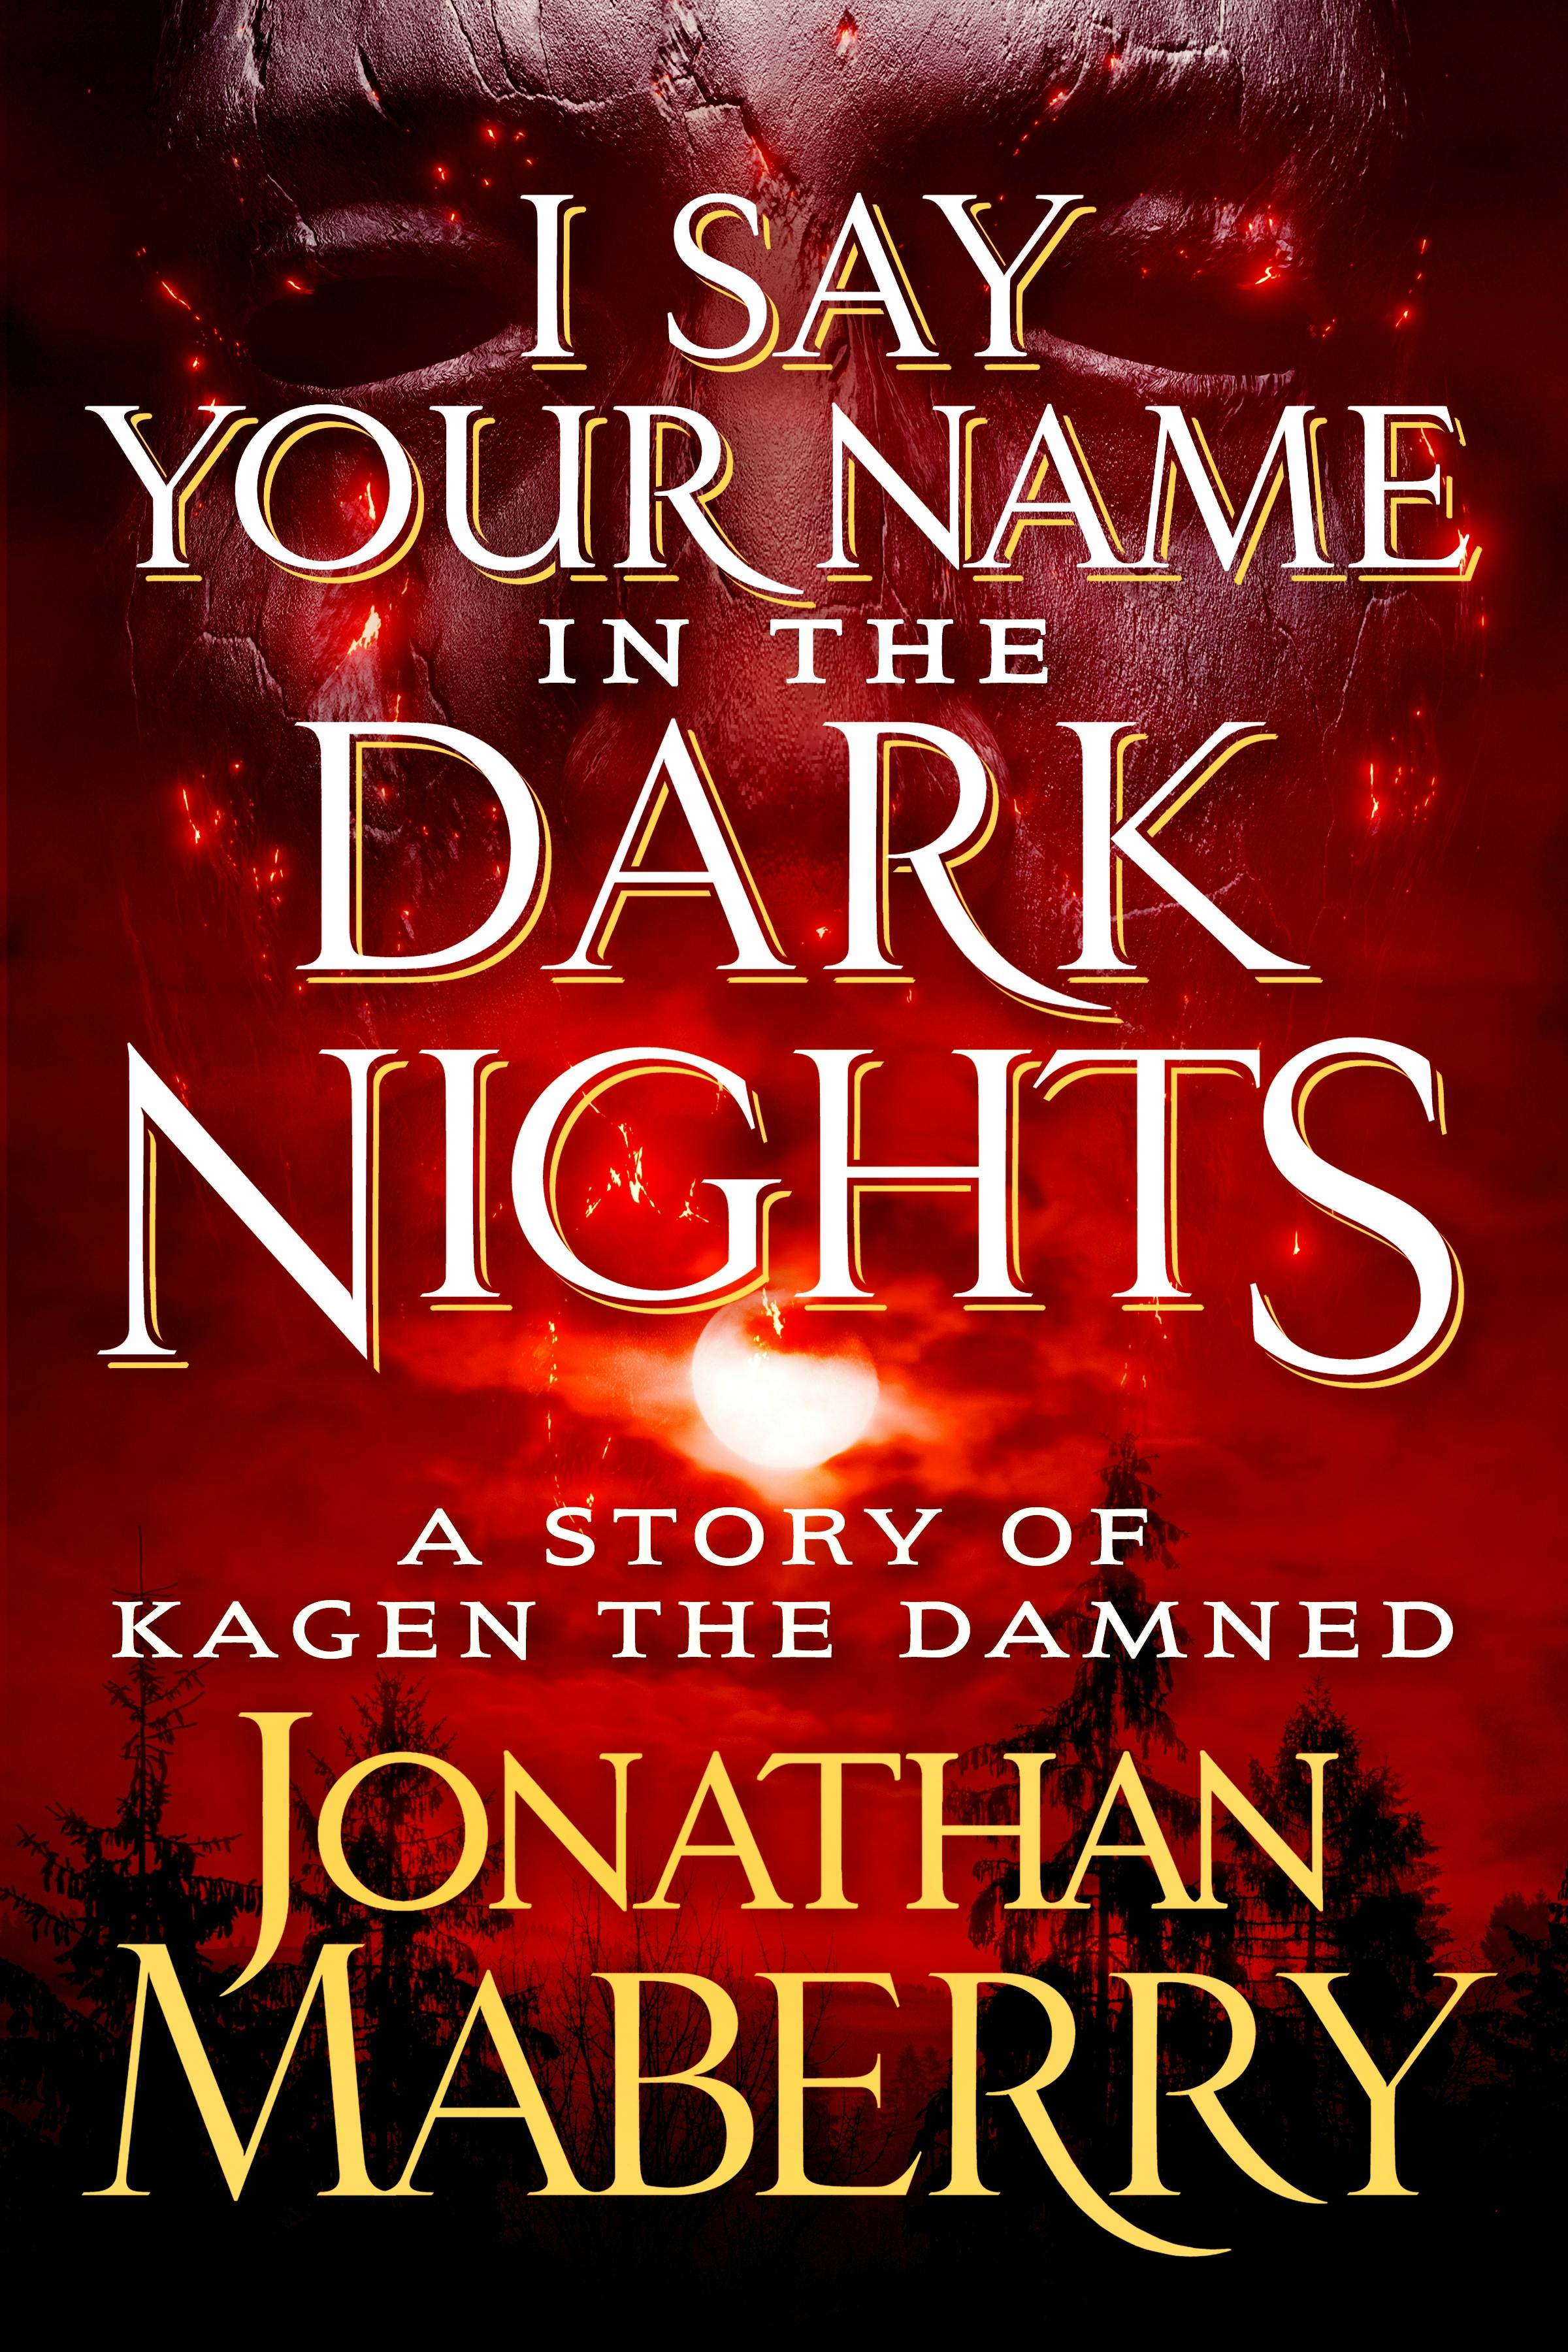 Image of I Say Your Name in the Dark Nights